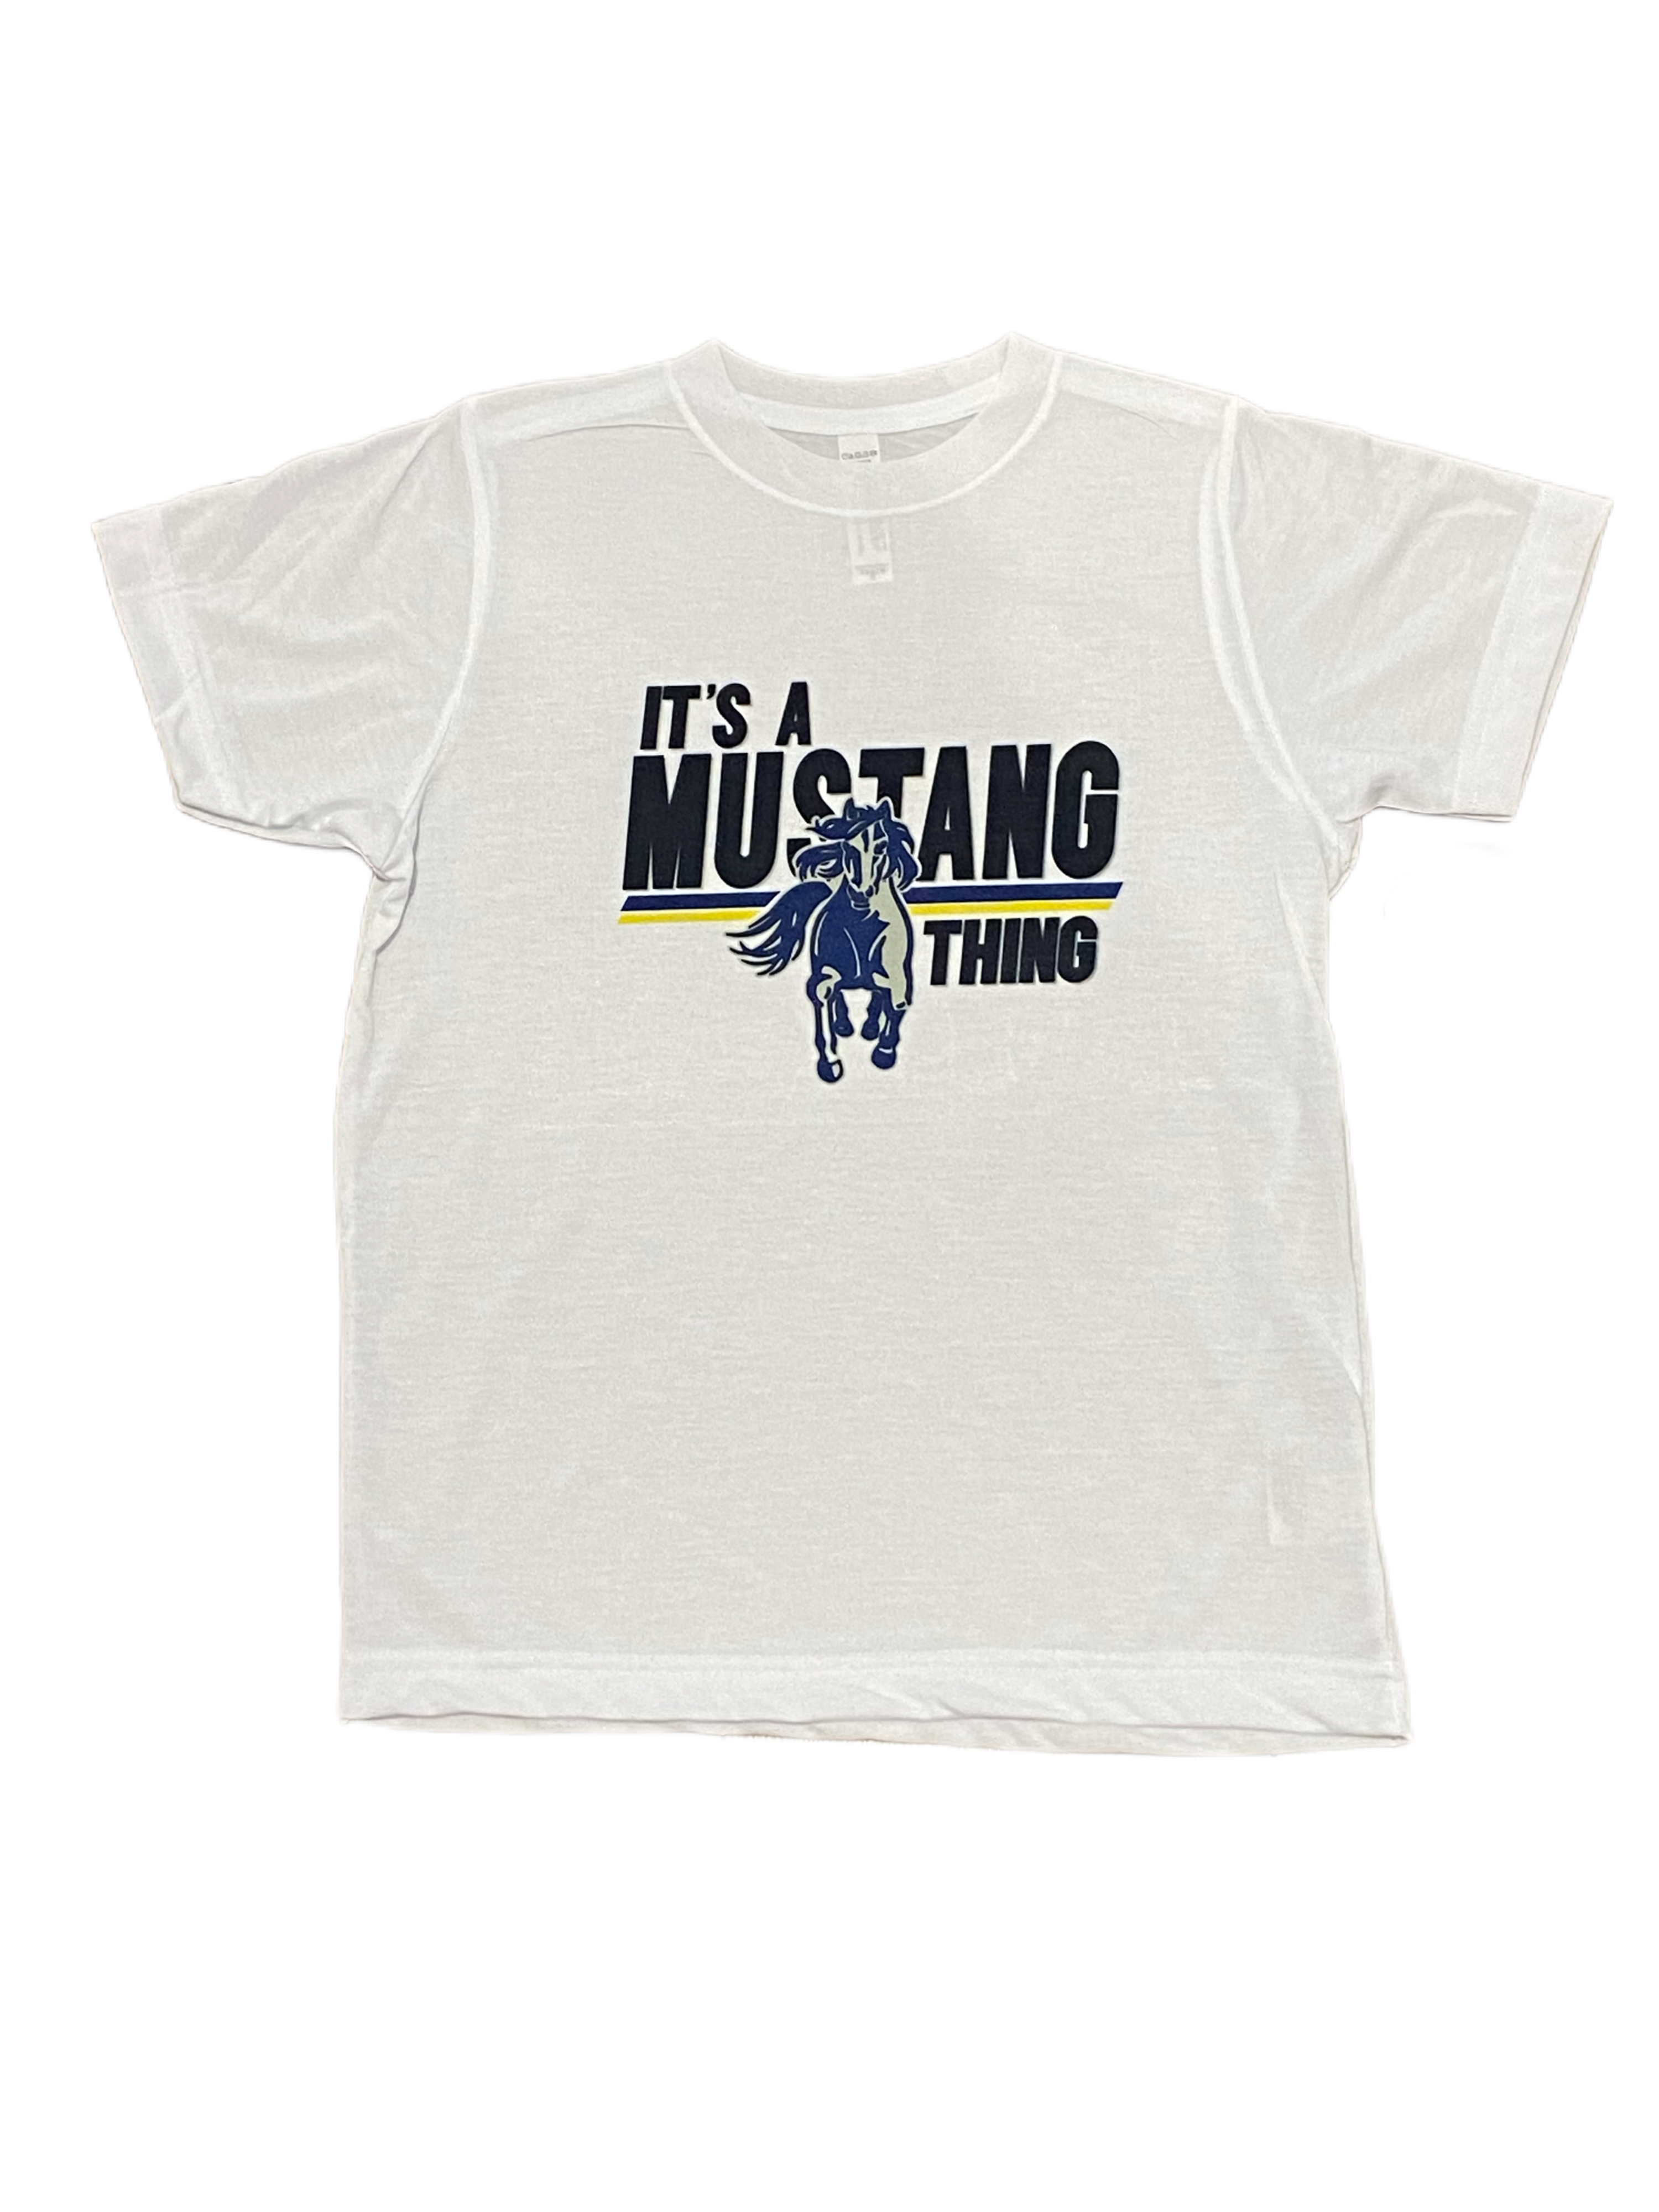 IT’S A MUSTANG THING Tee